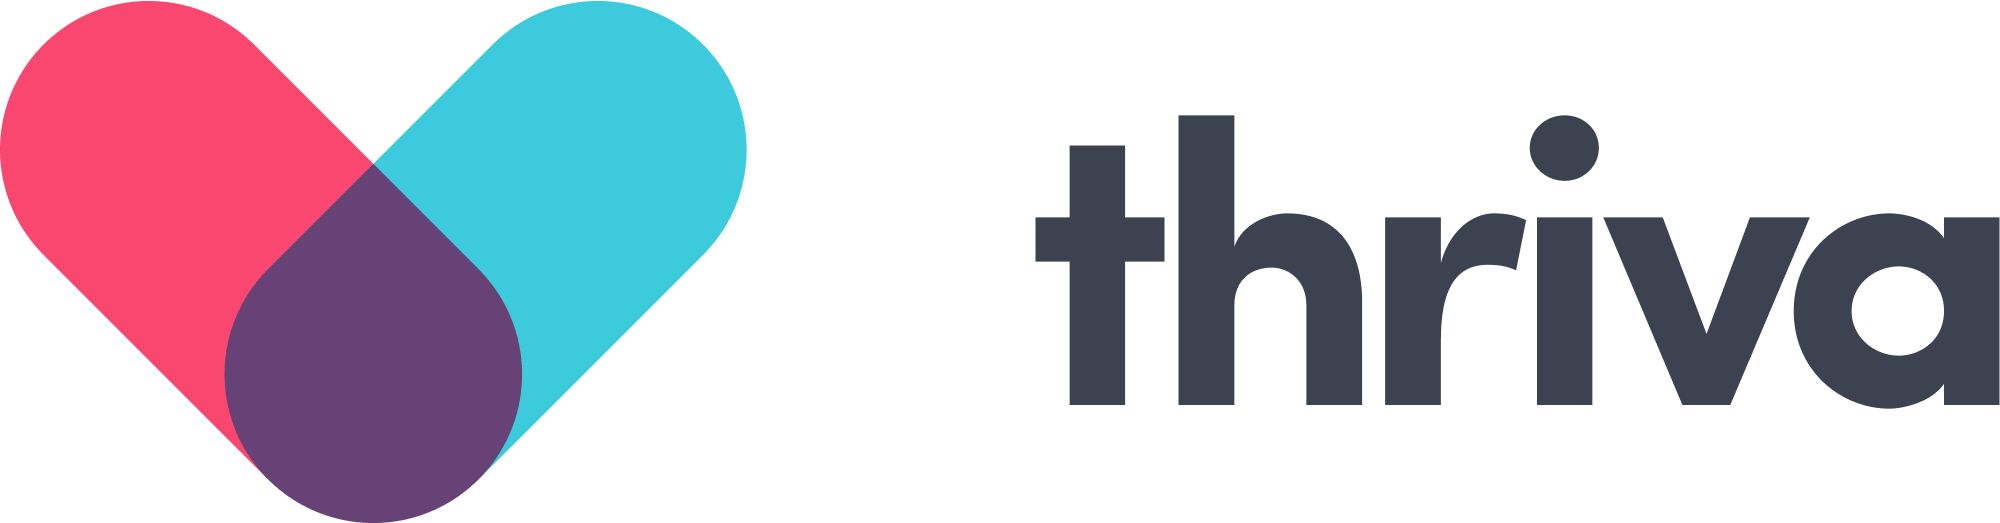 Thriva logo for Top Employers Winning Tech Talent | Hired